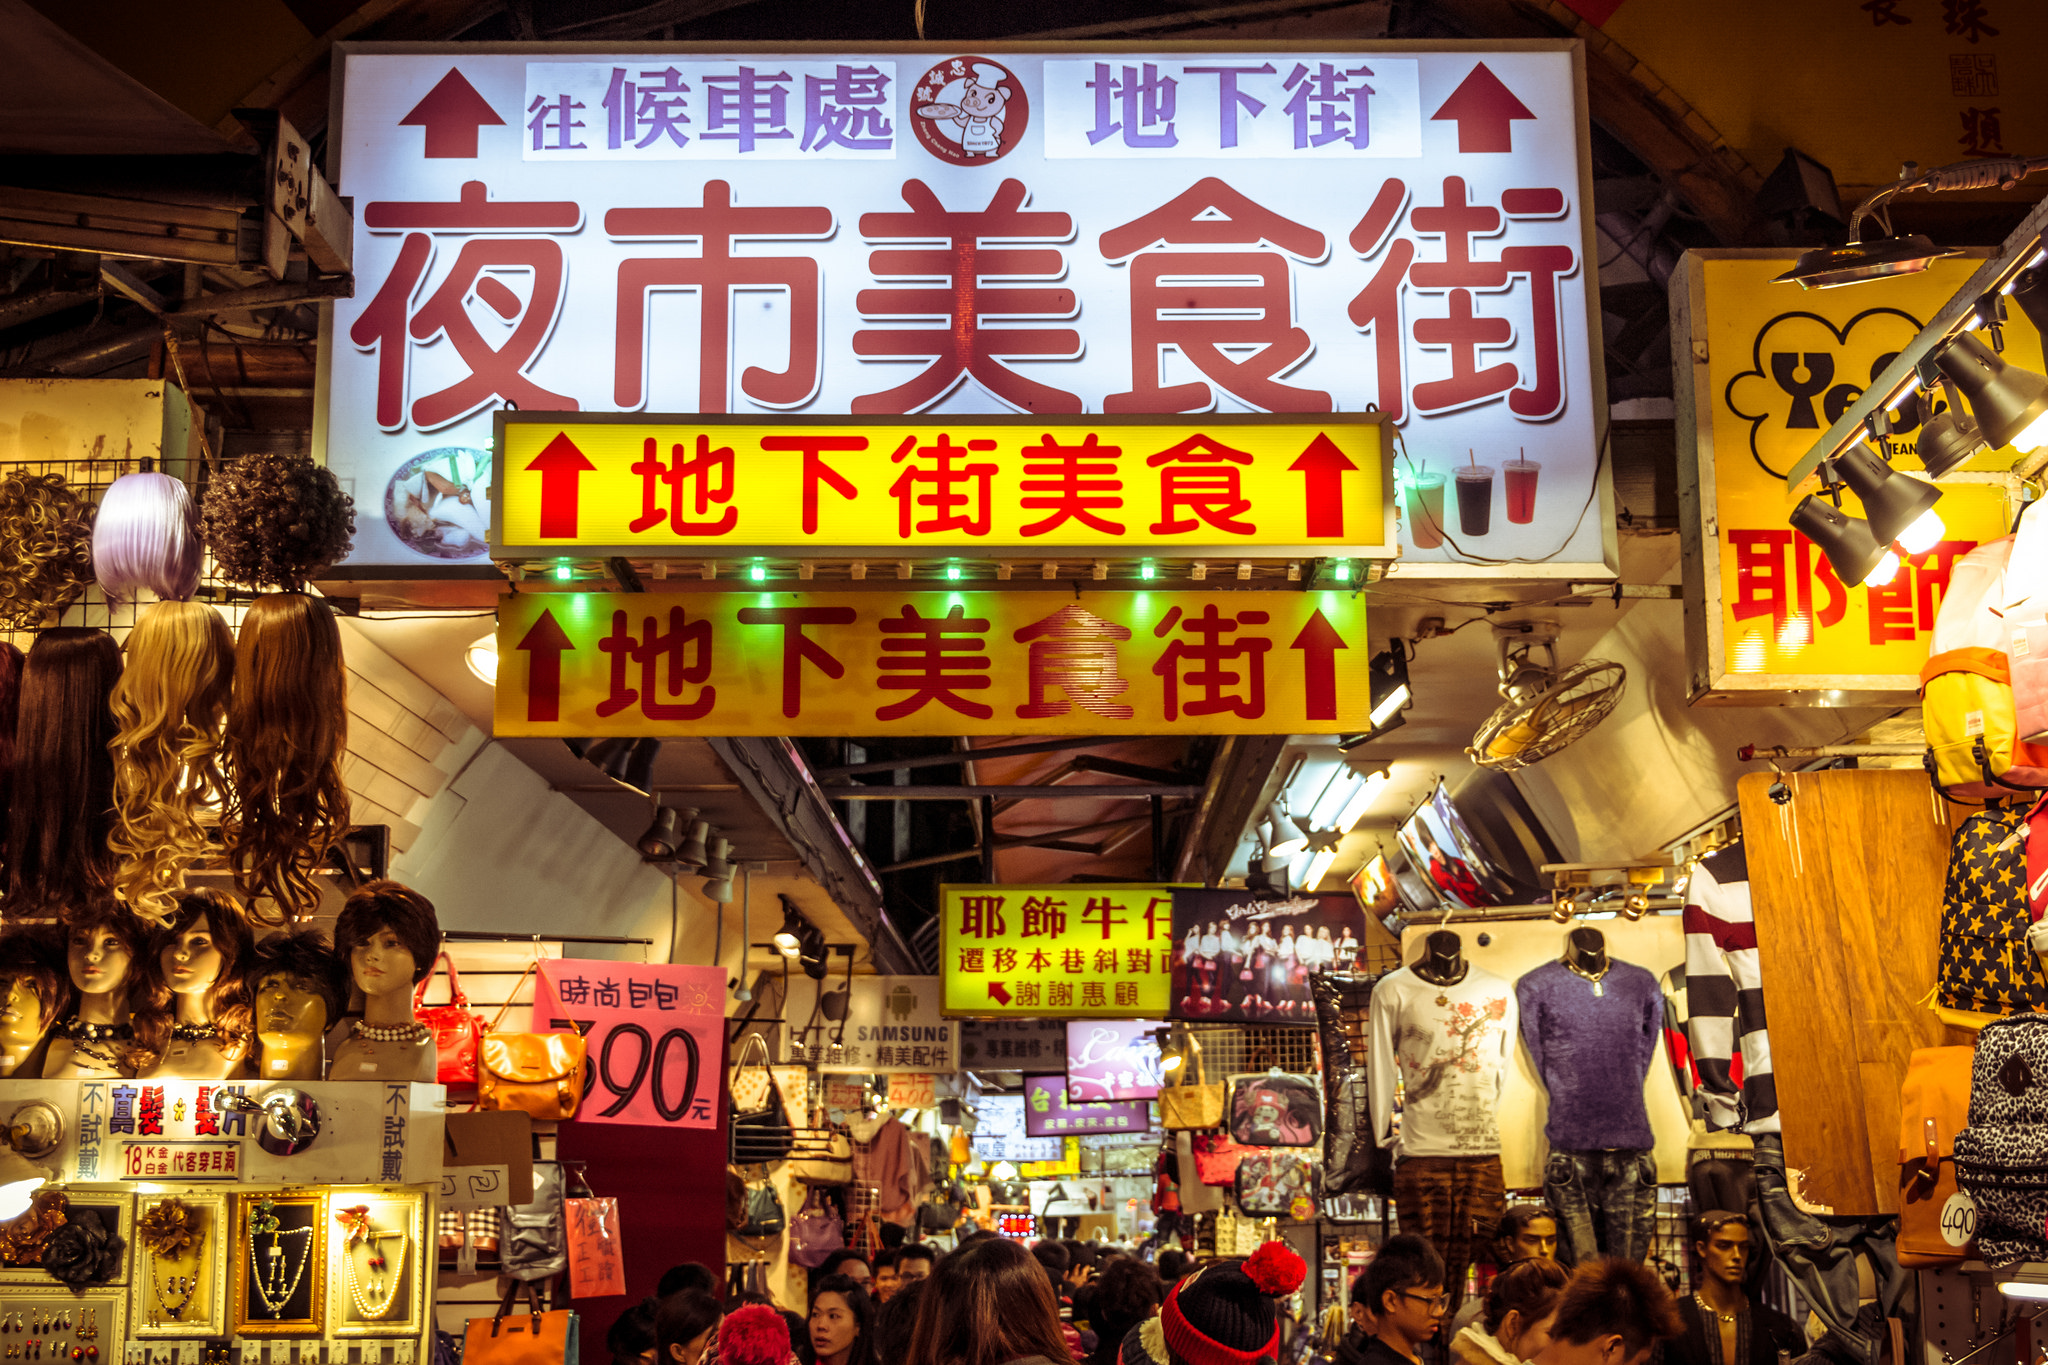 The colorful Shilin Night Market. Pic: Alexander Synaptic/flickr